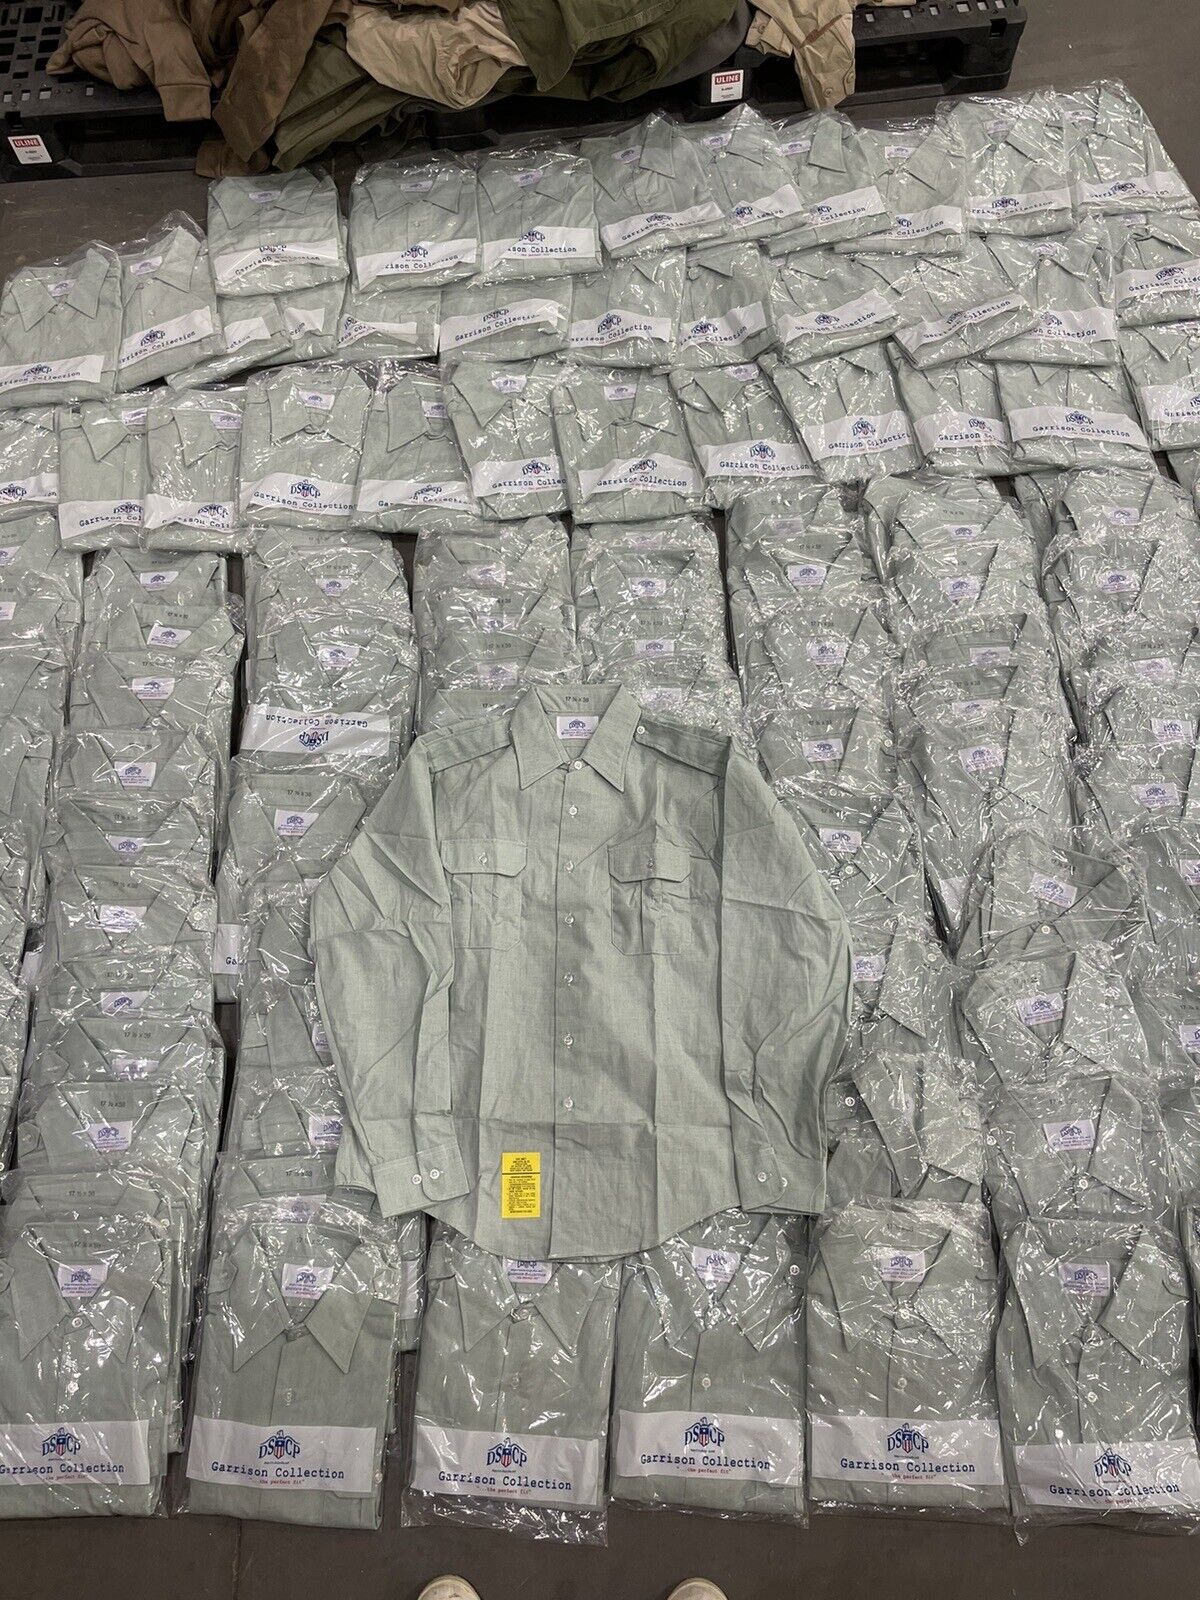 US ARMY Green AG-415 Dress Shirt Size 17.5x38 LONG Sleeve LOT OF 125 NEW DSCP